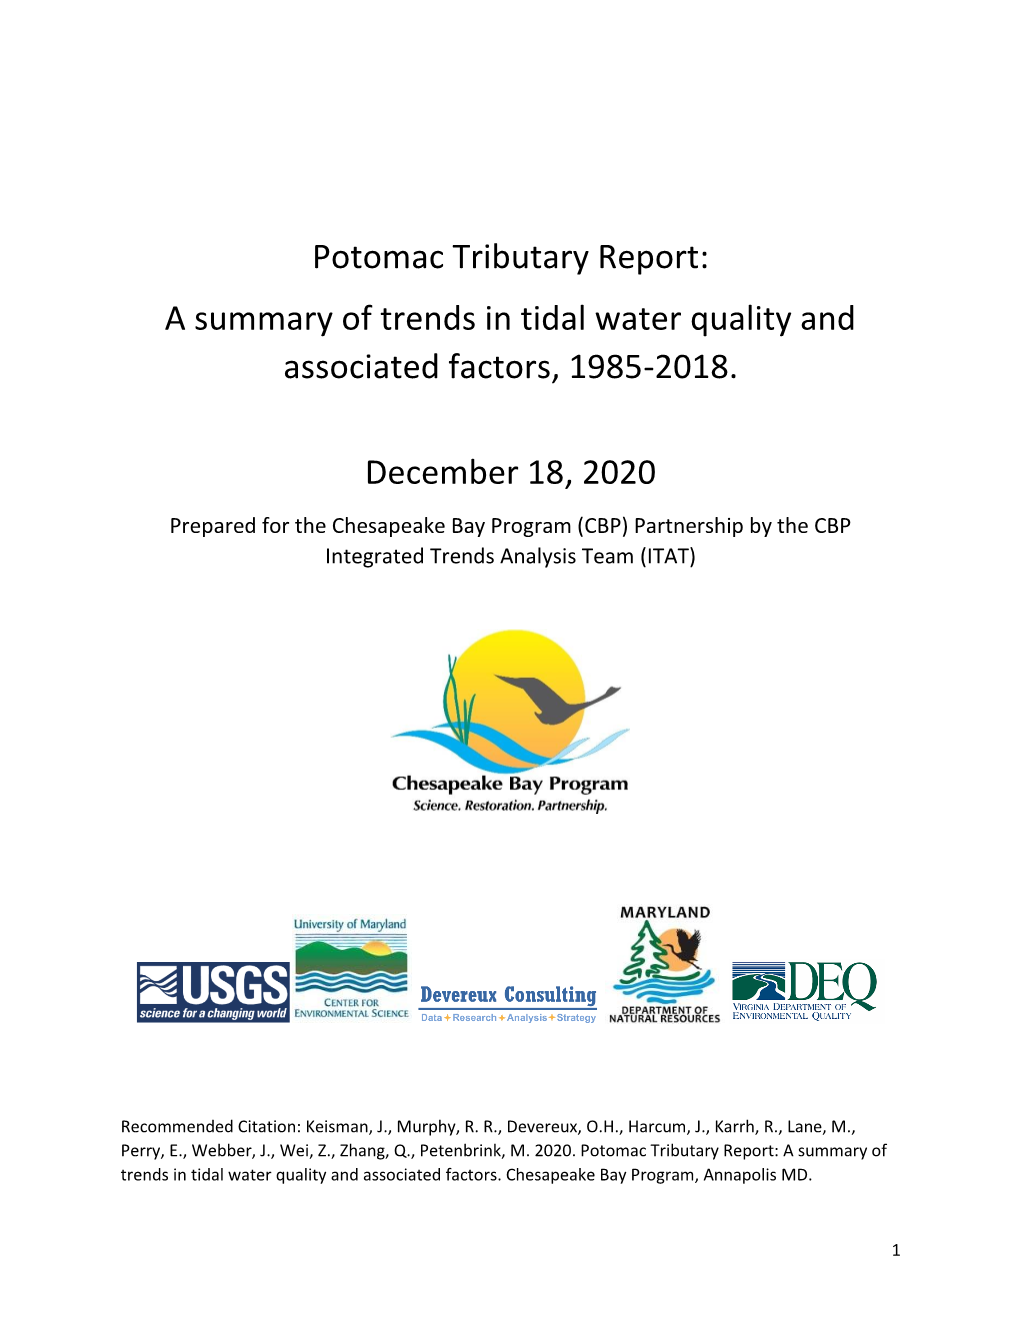 Potomac Tributary Report: a Summary of Trends in Tidal Water Quality and Associated Factors, 1985-2018